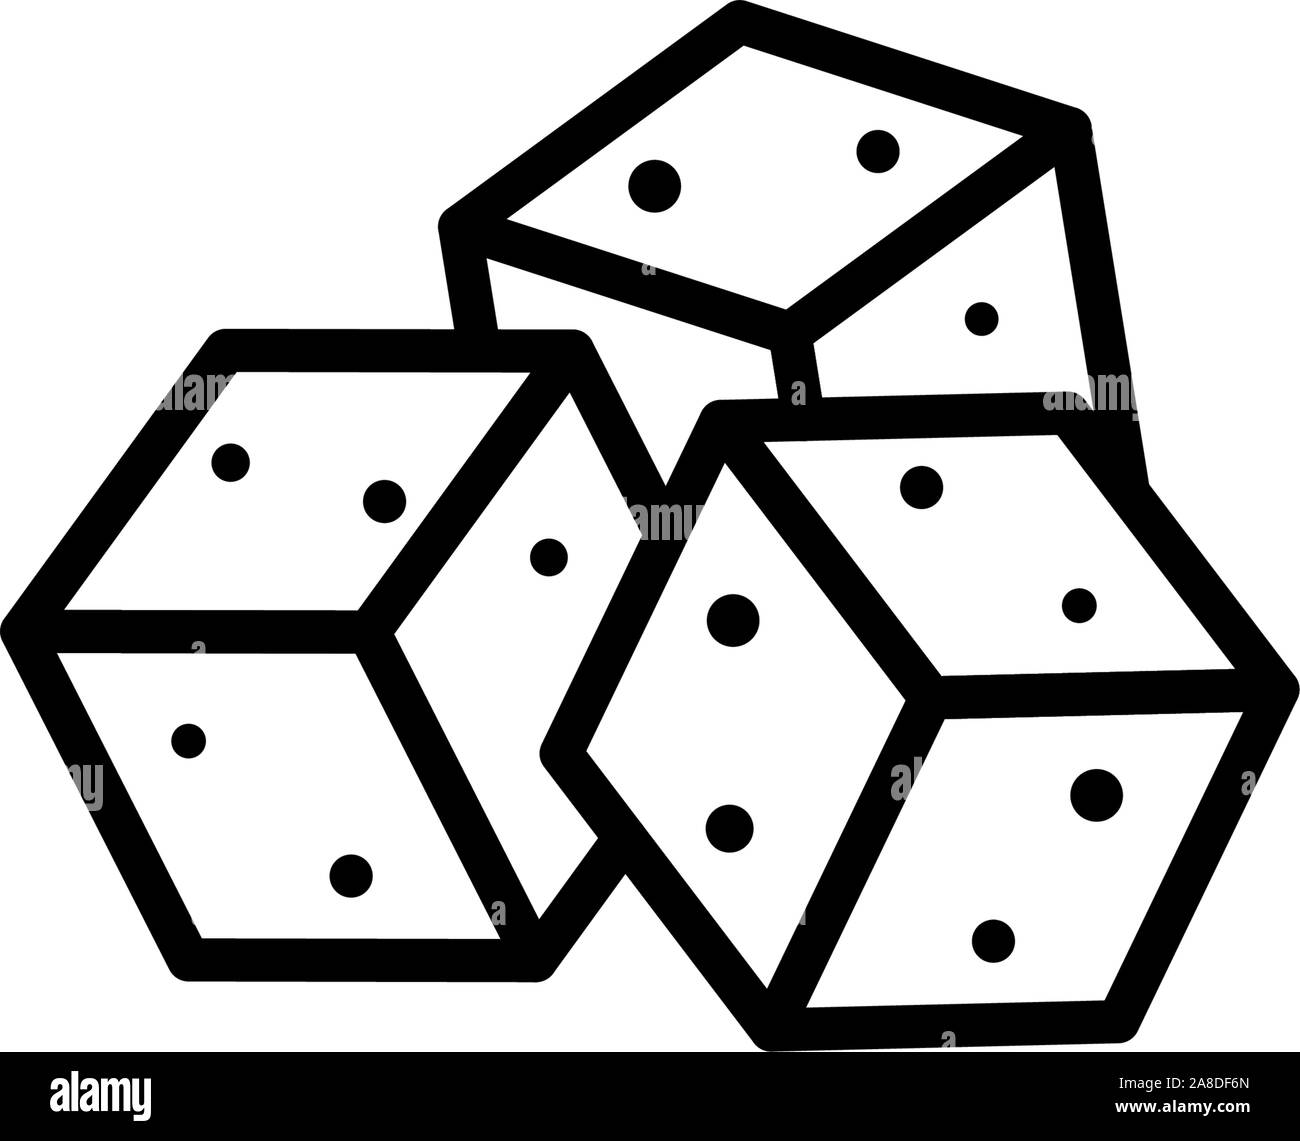 Sugar crystal three outline cubes icon isolated on white background. Vector calories or diabetes symbol eps illustration Stock Vector